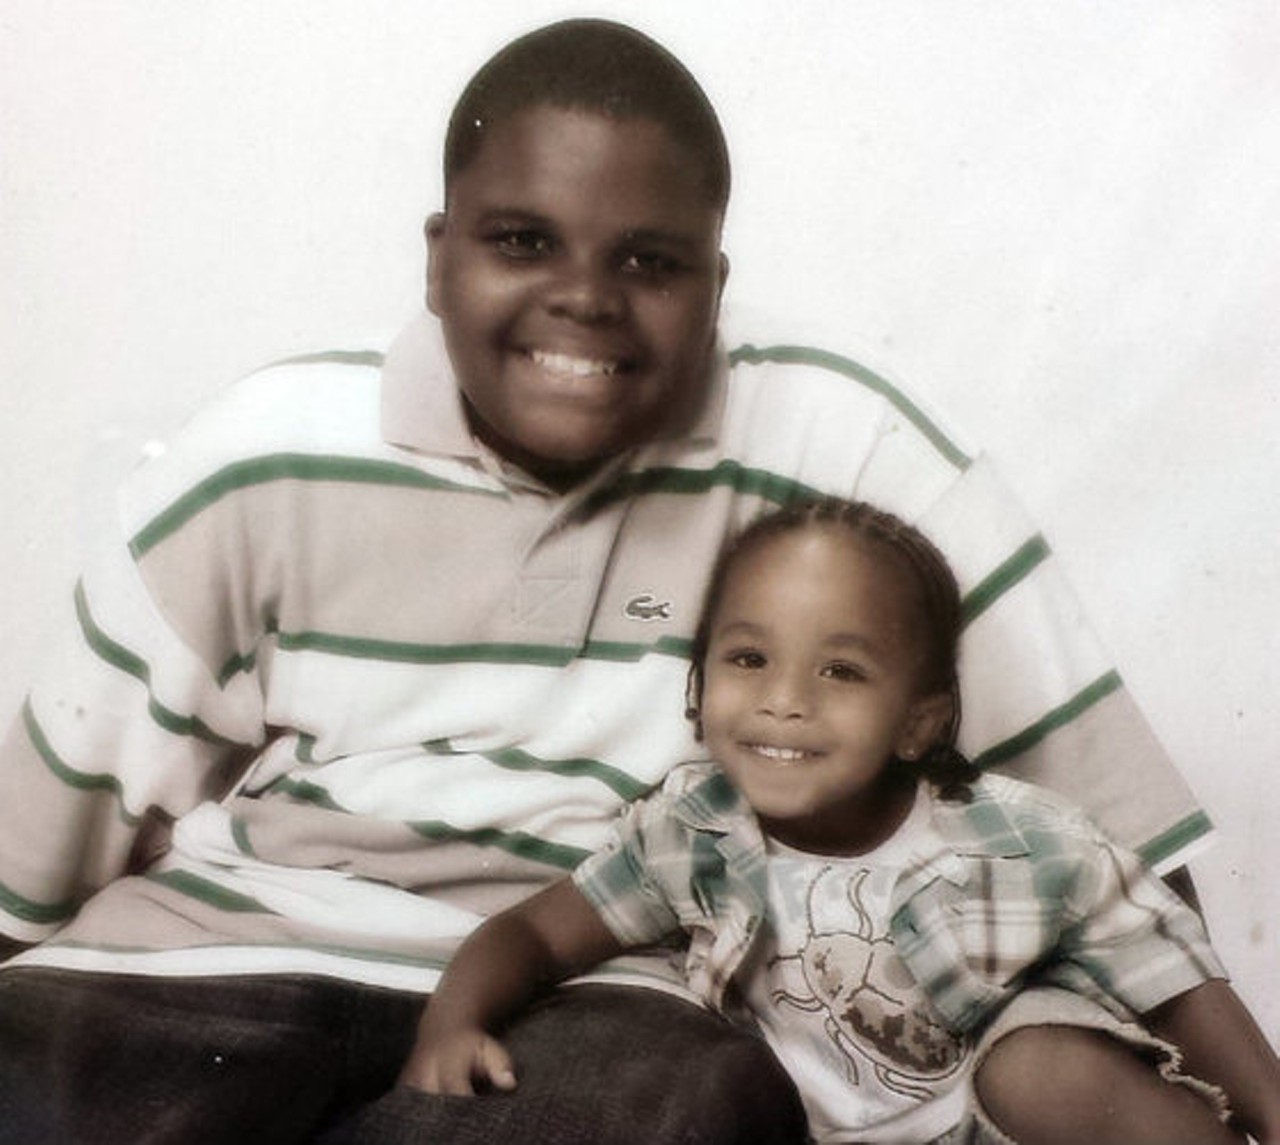 Barely 24 hours after a Ferguson police officer shot and killed Michael Brown, his family wanted people to know that Brown was a shy, nonviolent kid who loved music and wanted to go to college. Read "Family of Michael Brown, Teenager Shot to Death By Ferguson Police, Talks About His Life."